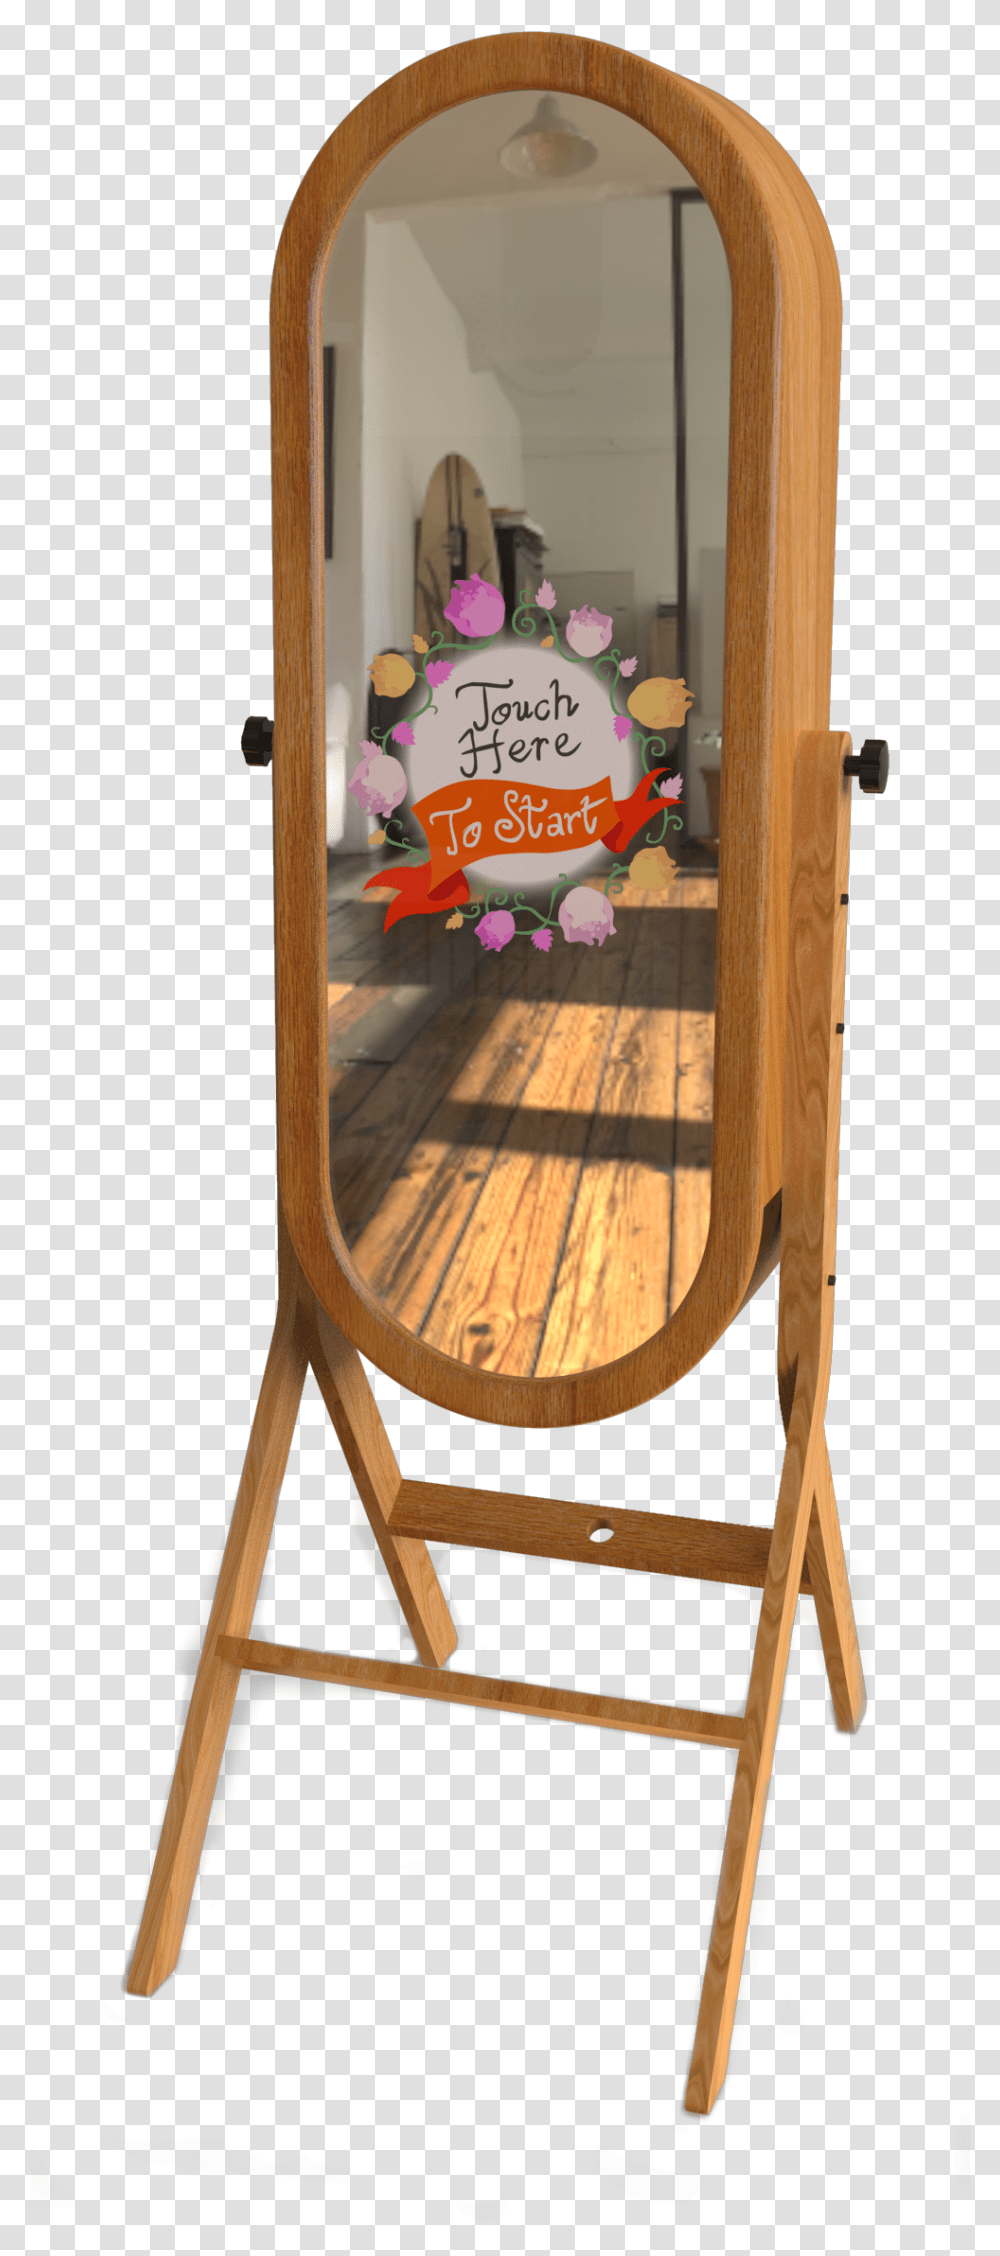 Phonix Magic Mirror Photobooth - The Plywood, Chair, Furniture, Canvas Transparent Png